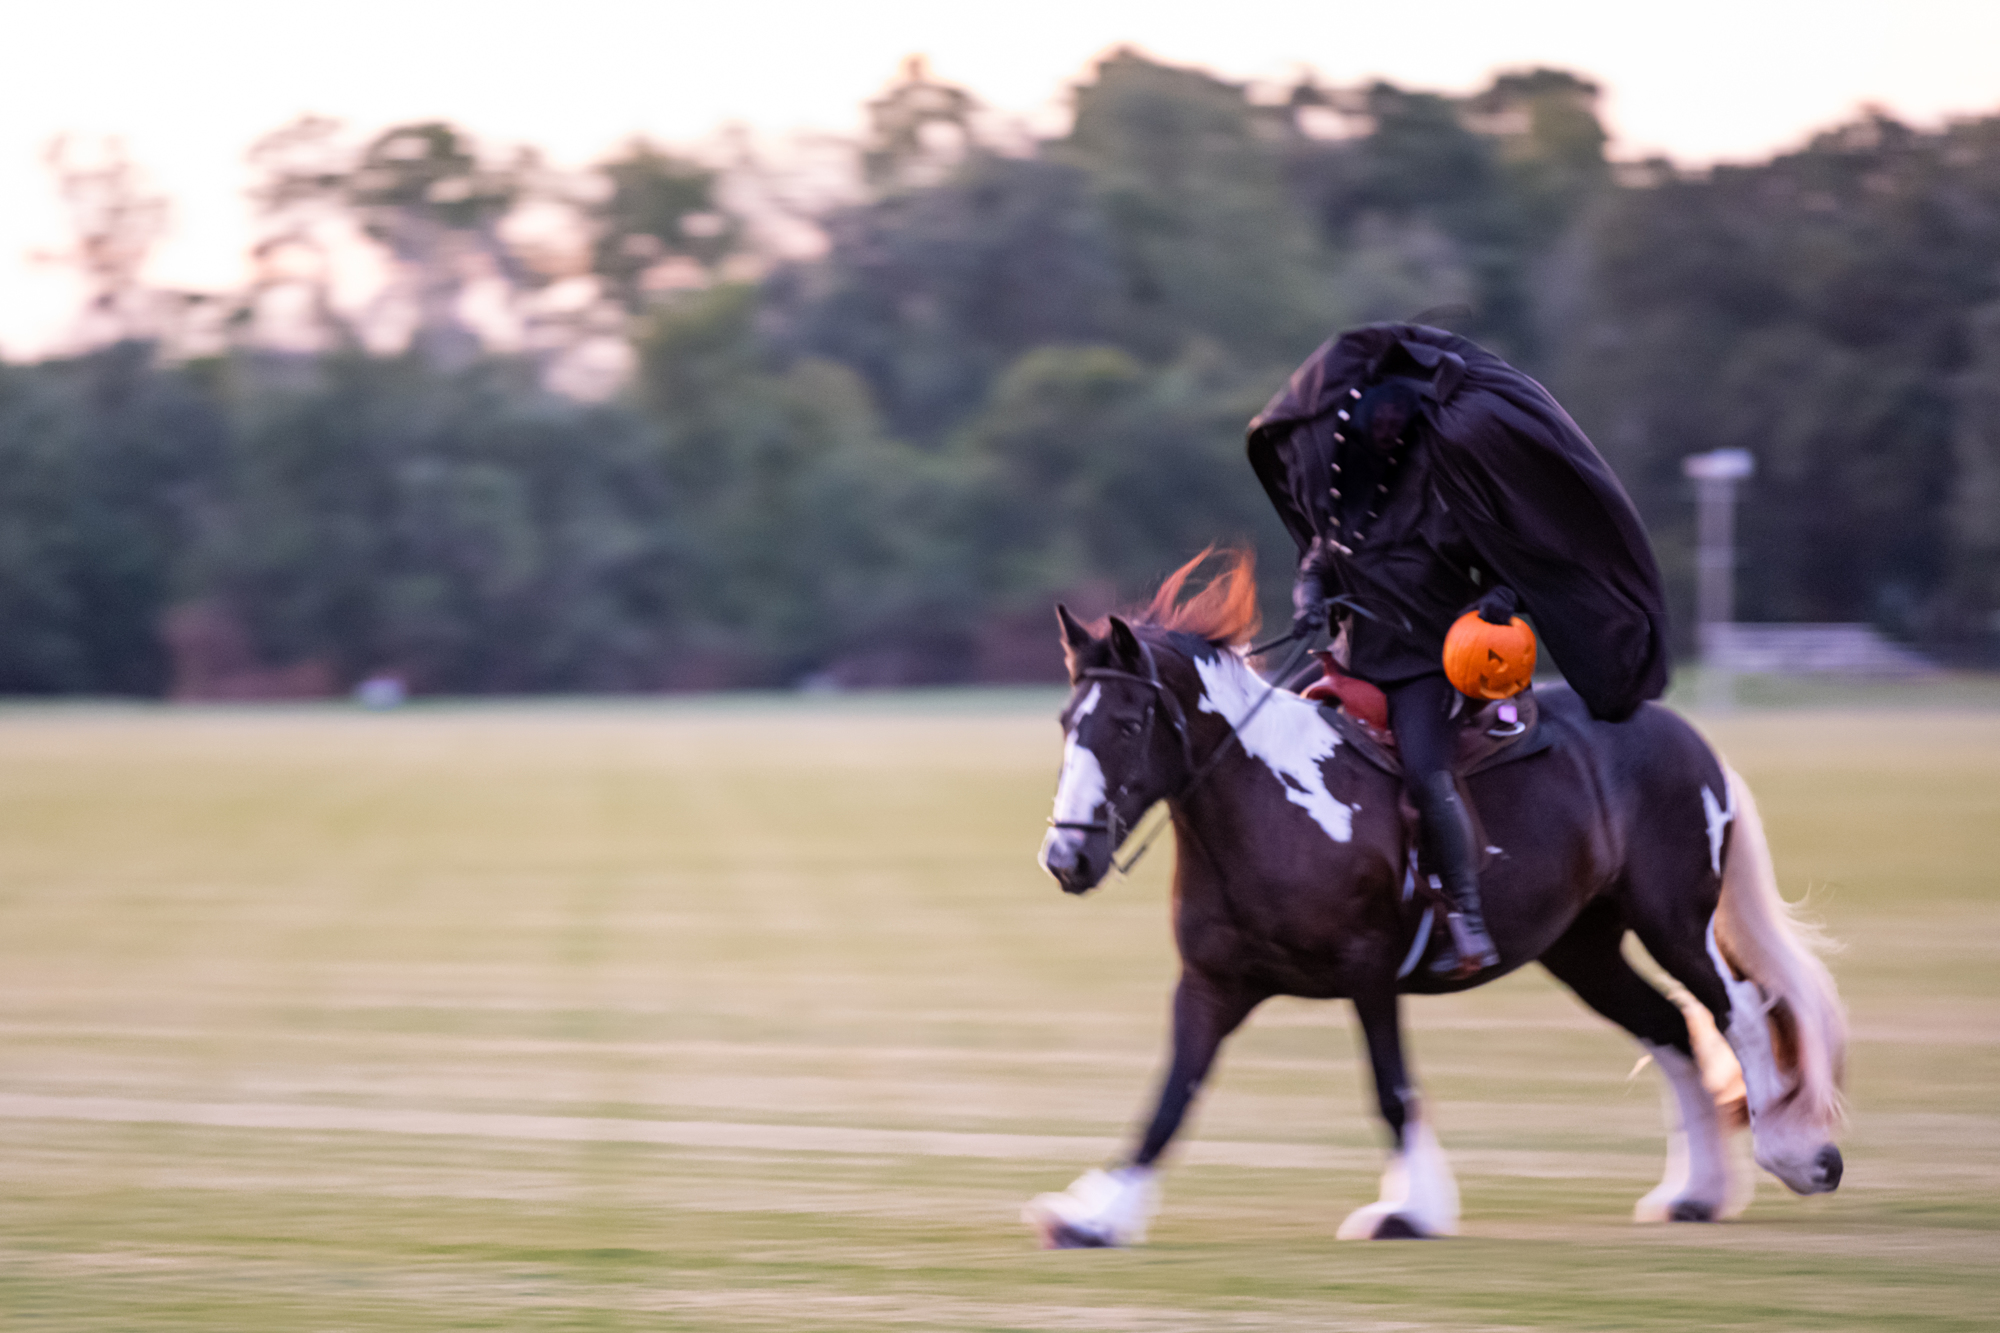 The headless horseman always steals the show in the 